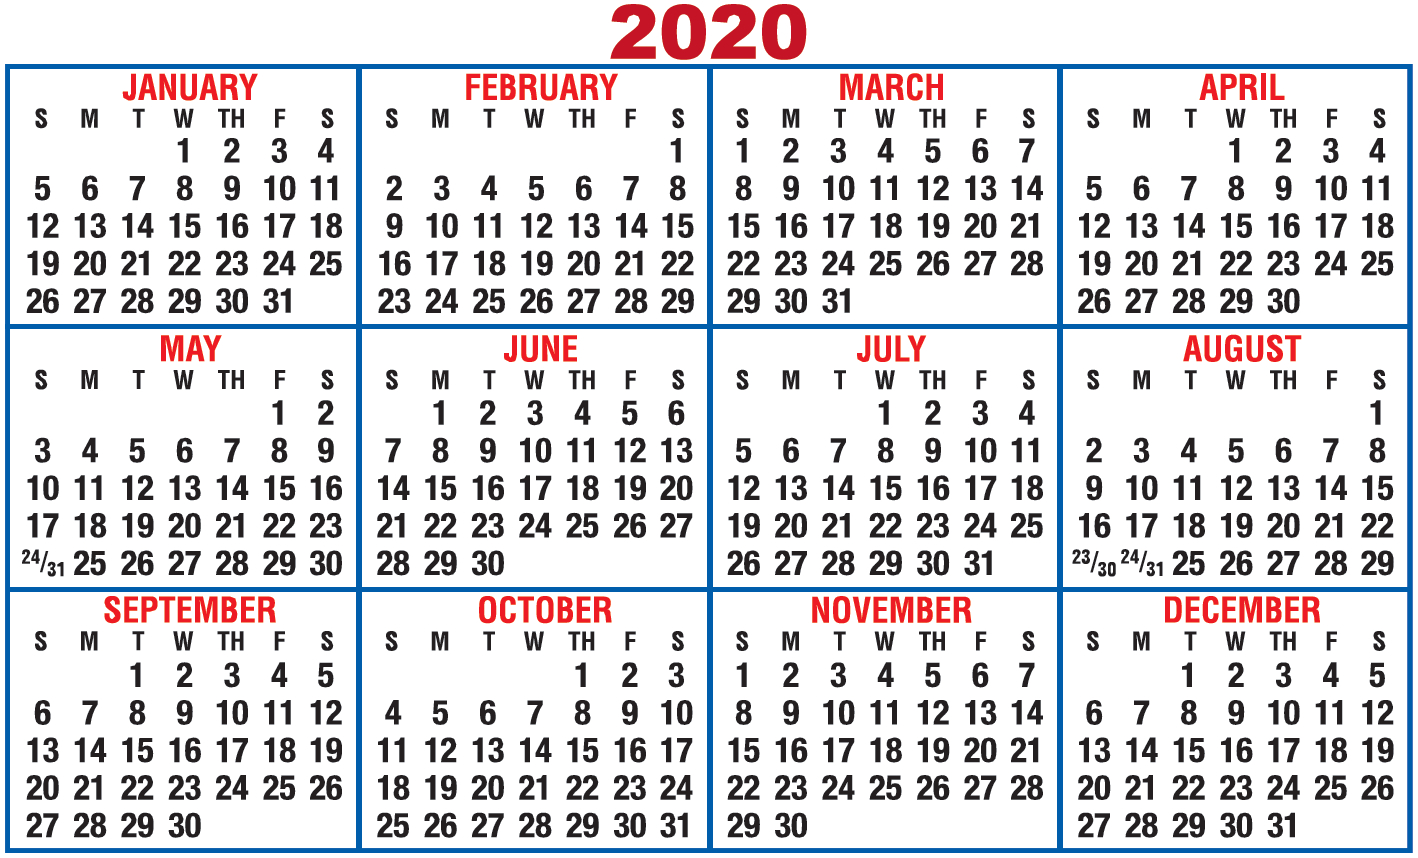 Index Of Imagesmiscpictures throughout Keyboard Calendar Strips 2020